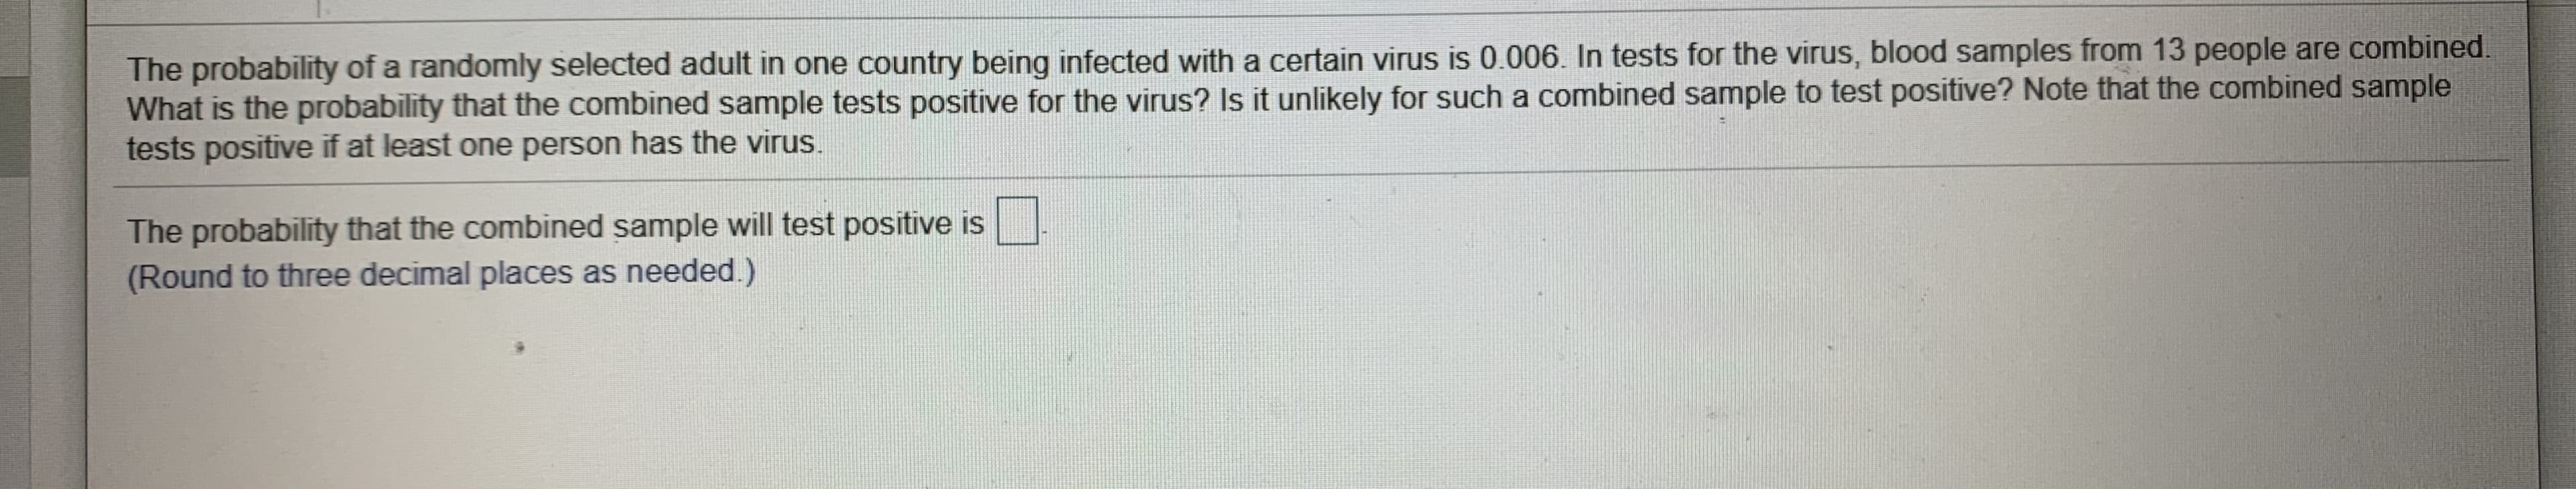 The probability of a randomly selected adult in one country being infected with a certain virus is 0.006. In tests for the virus, blood samples from 13 people are combined
What is the probability that the combined sample tests positive for the virus? Is it unlikely for such a combined sample to test positive? Note that the combined sample
tests positive if at least one person has the virus.
The probability that the combined sample will test positive is
(Round to three decimal places as needed.)
